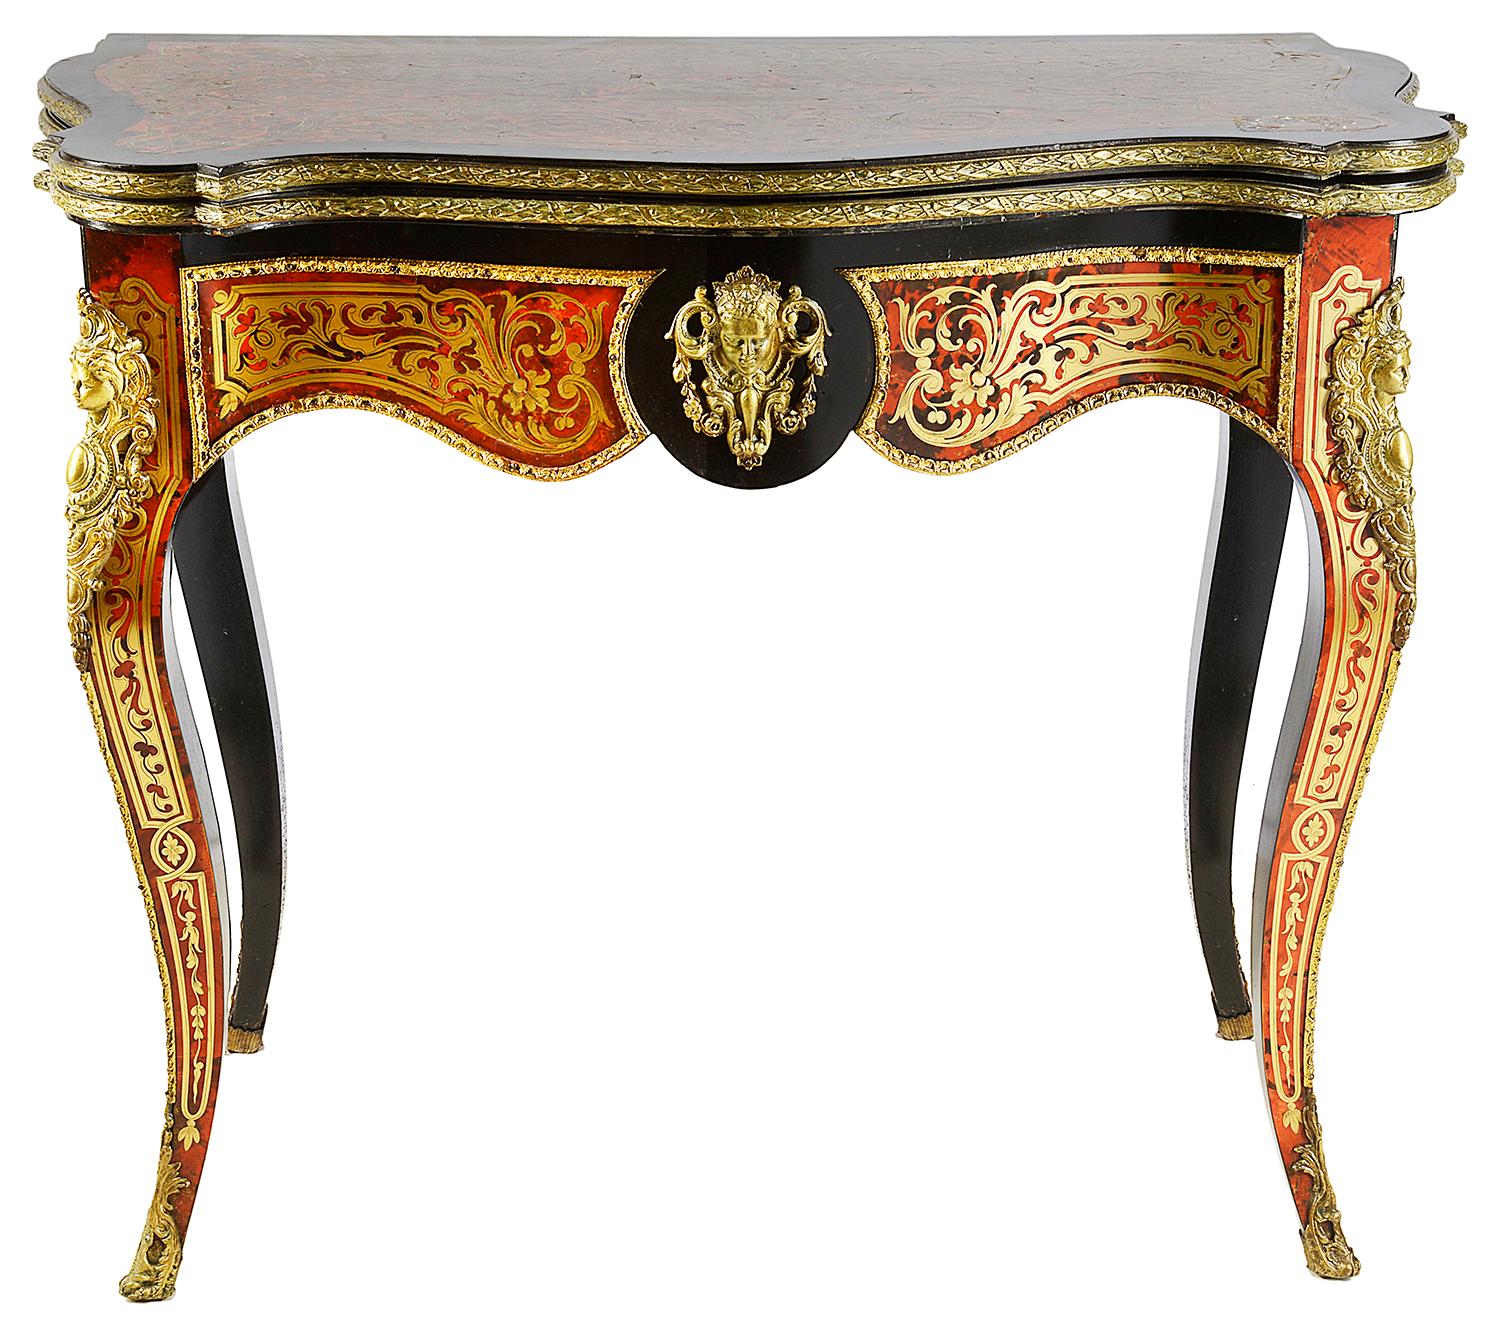 19th century French Louis XVI style Boulle inlaid, ormolu-mounted card table, serpentine in shape, having classical scrolling brass inlaid decoration to the top, opening to reveal a green baize card play surface, raised on elegant cabriole legs.